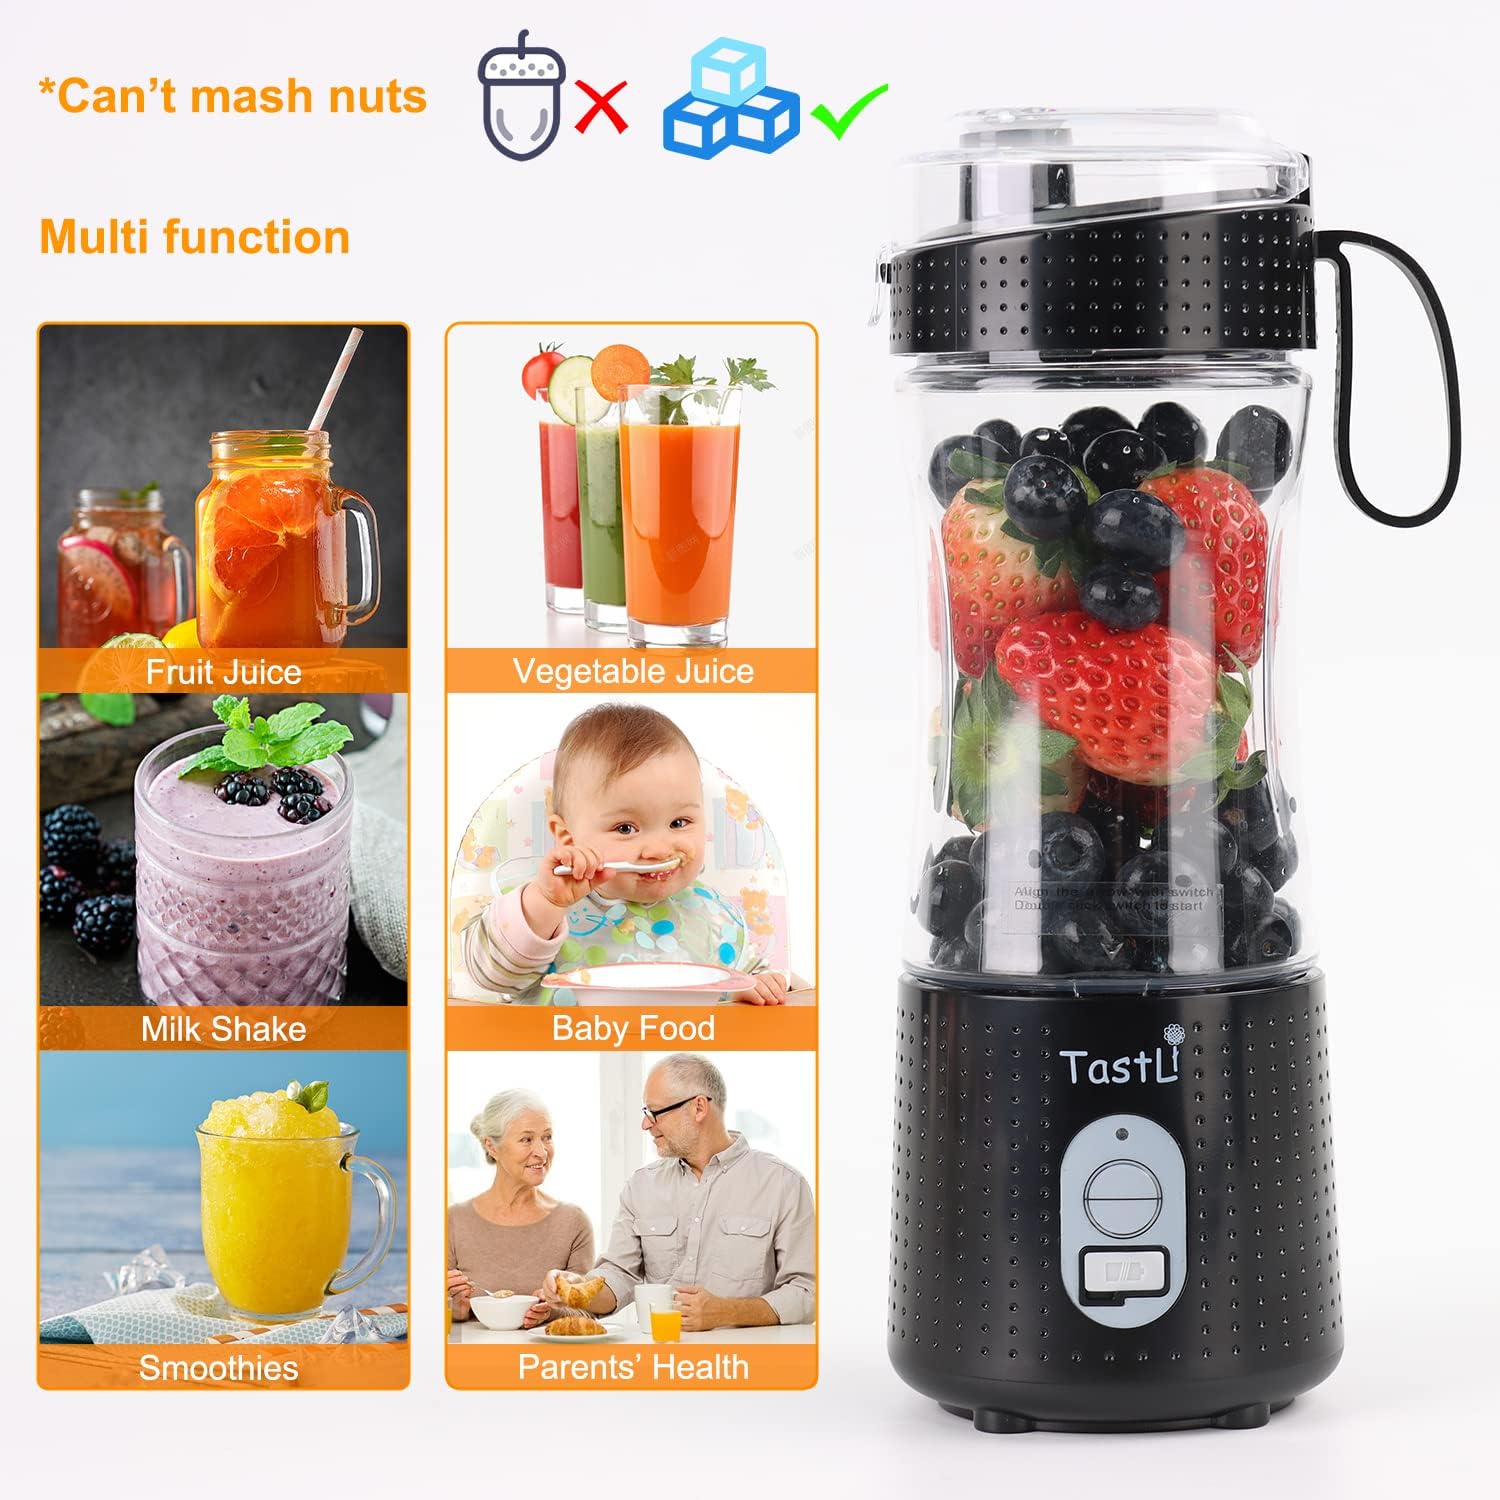 with Powerful Motor TastLi Portable Blender Black Personal Size Blender for Shakes and Smoothies 6 Blades and USB Rechargeable 4000mAh Mini Travel Electric Fruit Juicer Cup Ice Mixer Smoothie Blender